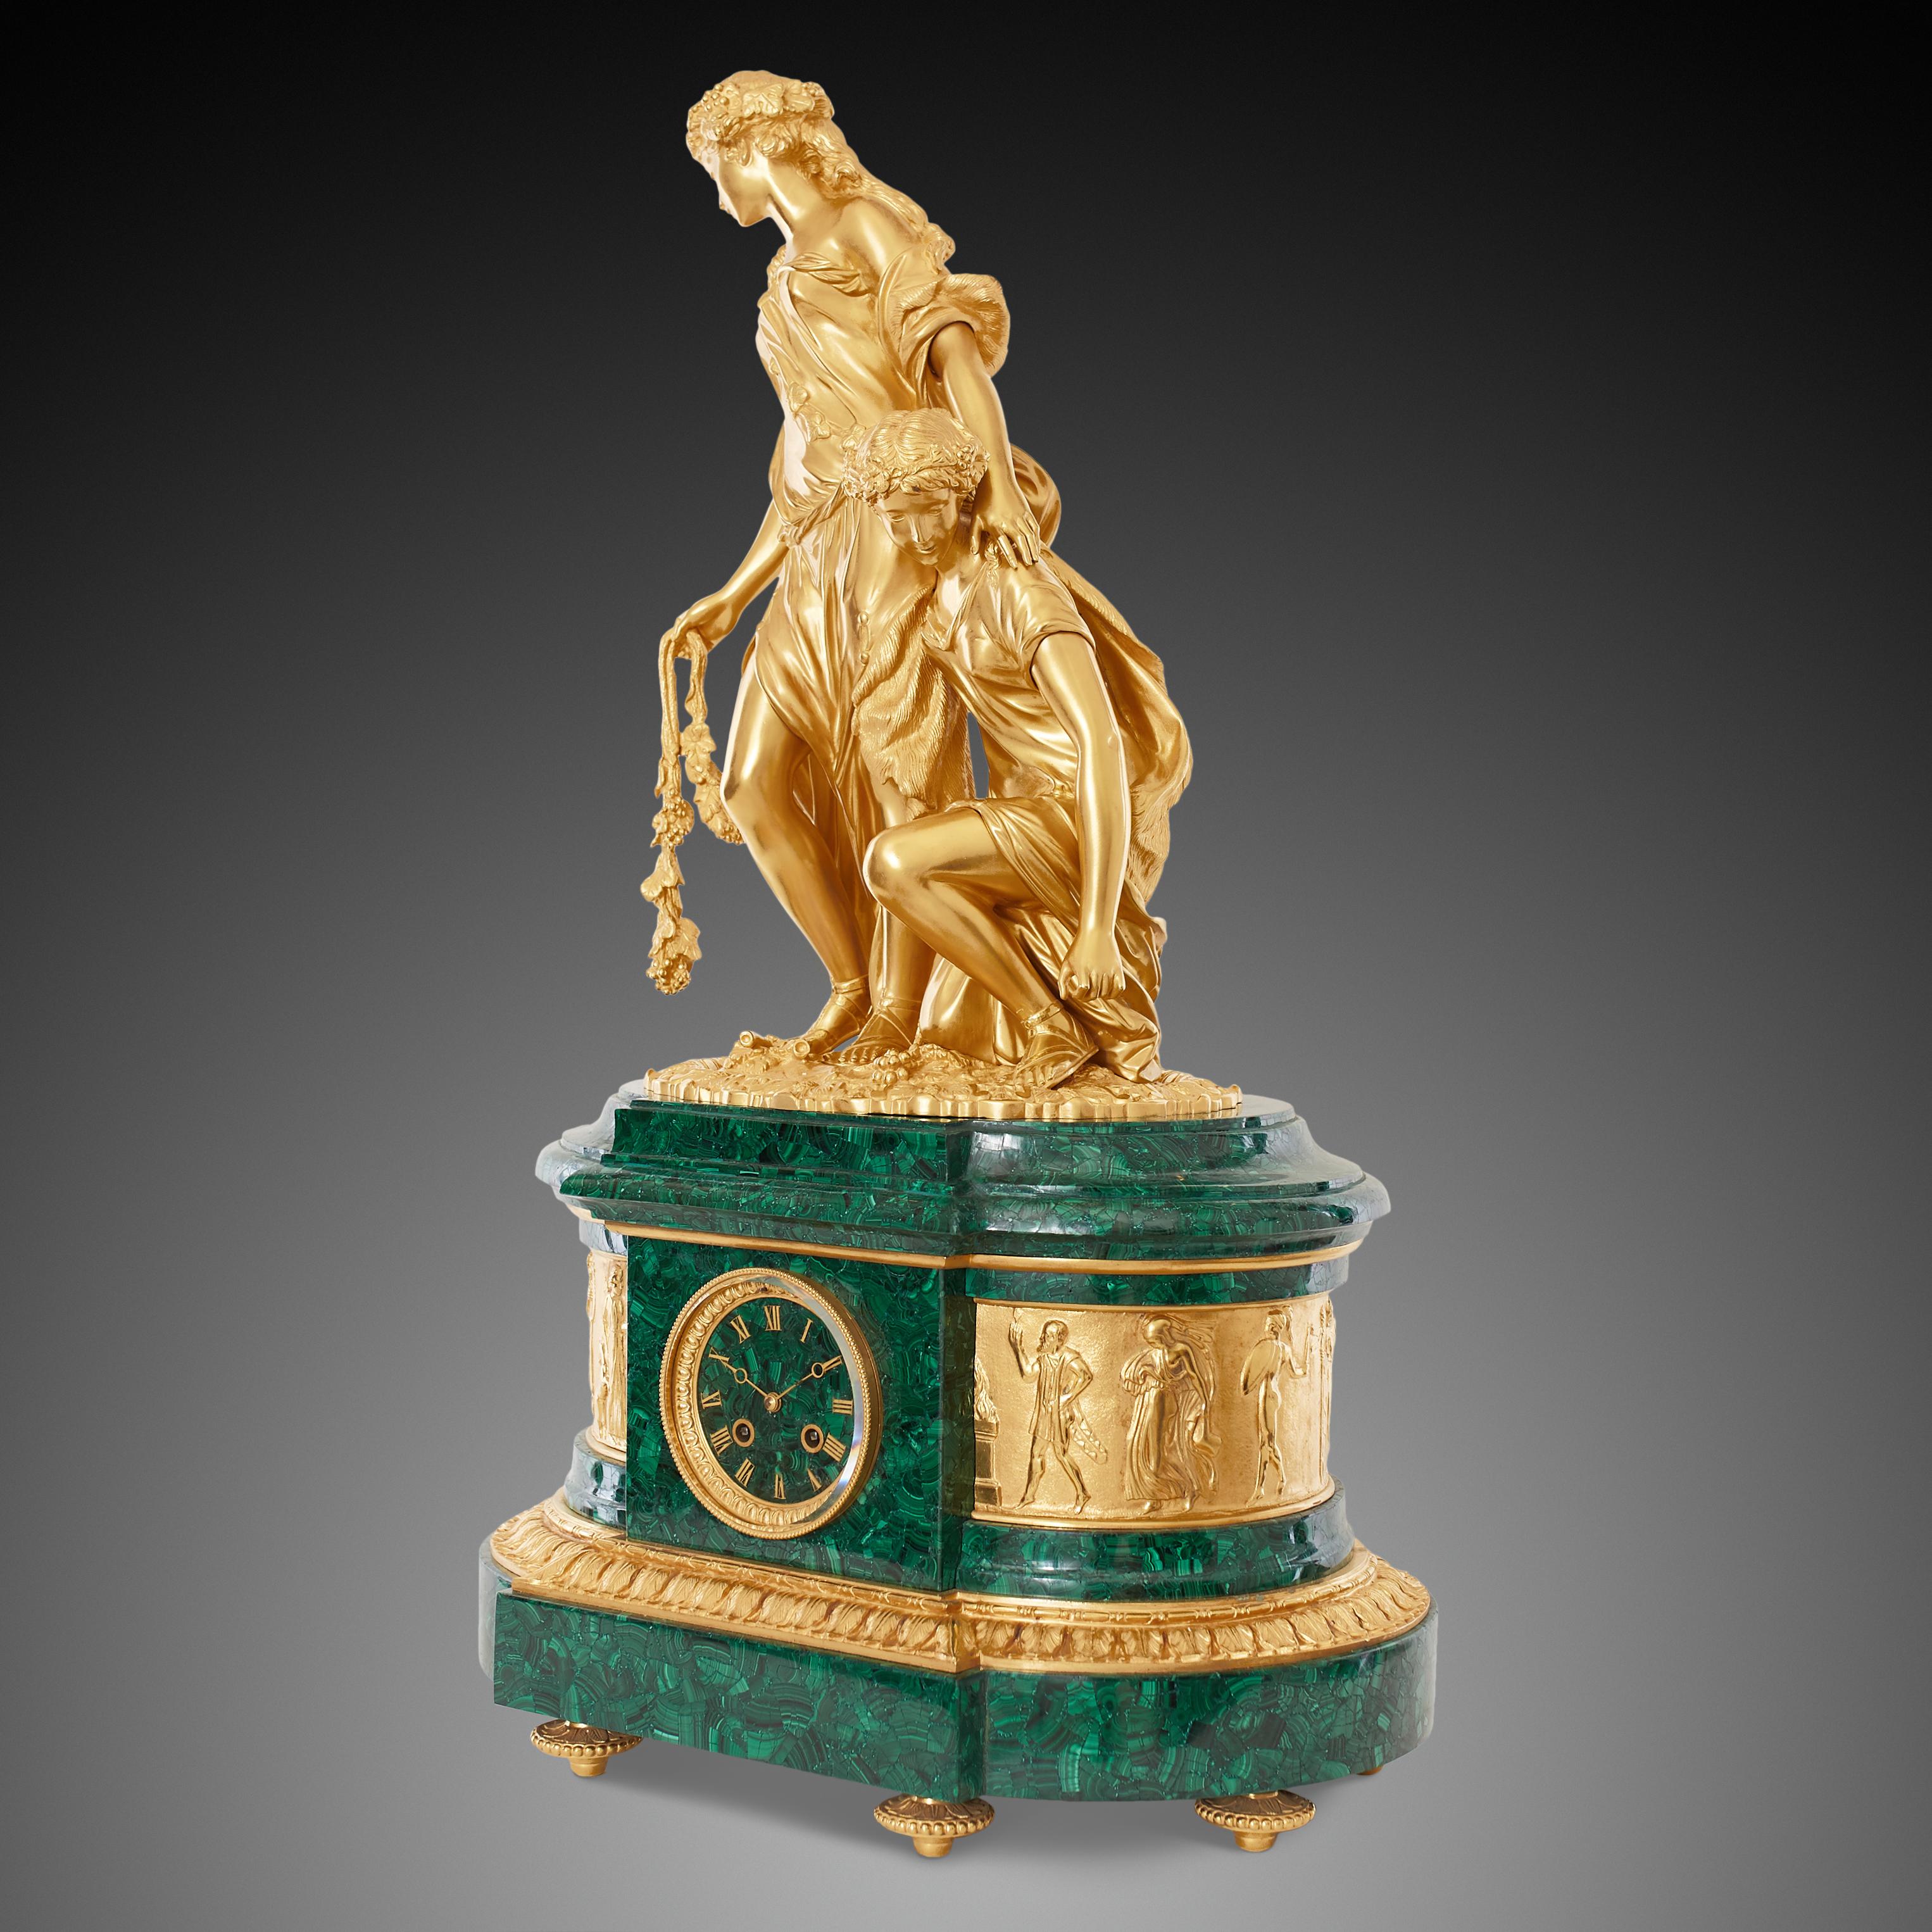 Late 19th century neoclassical style clock crafted from gilt bronze with malachite. The central clock features a striking ormolu sculptural surmount, depicting two female figures, dressed in classical Greek draped garment, and holding a grapevine.